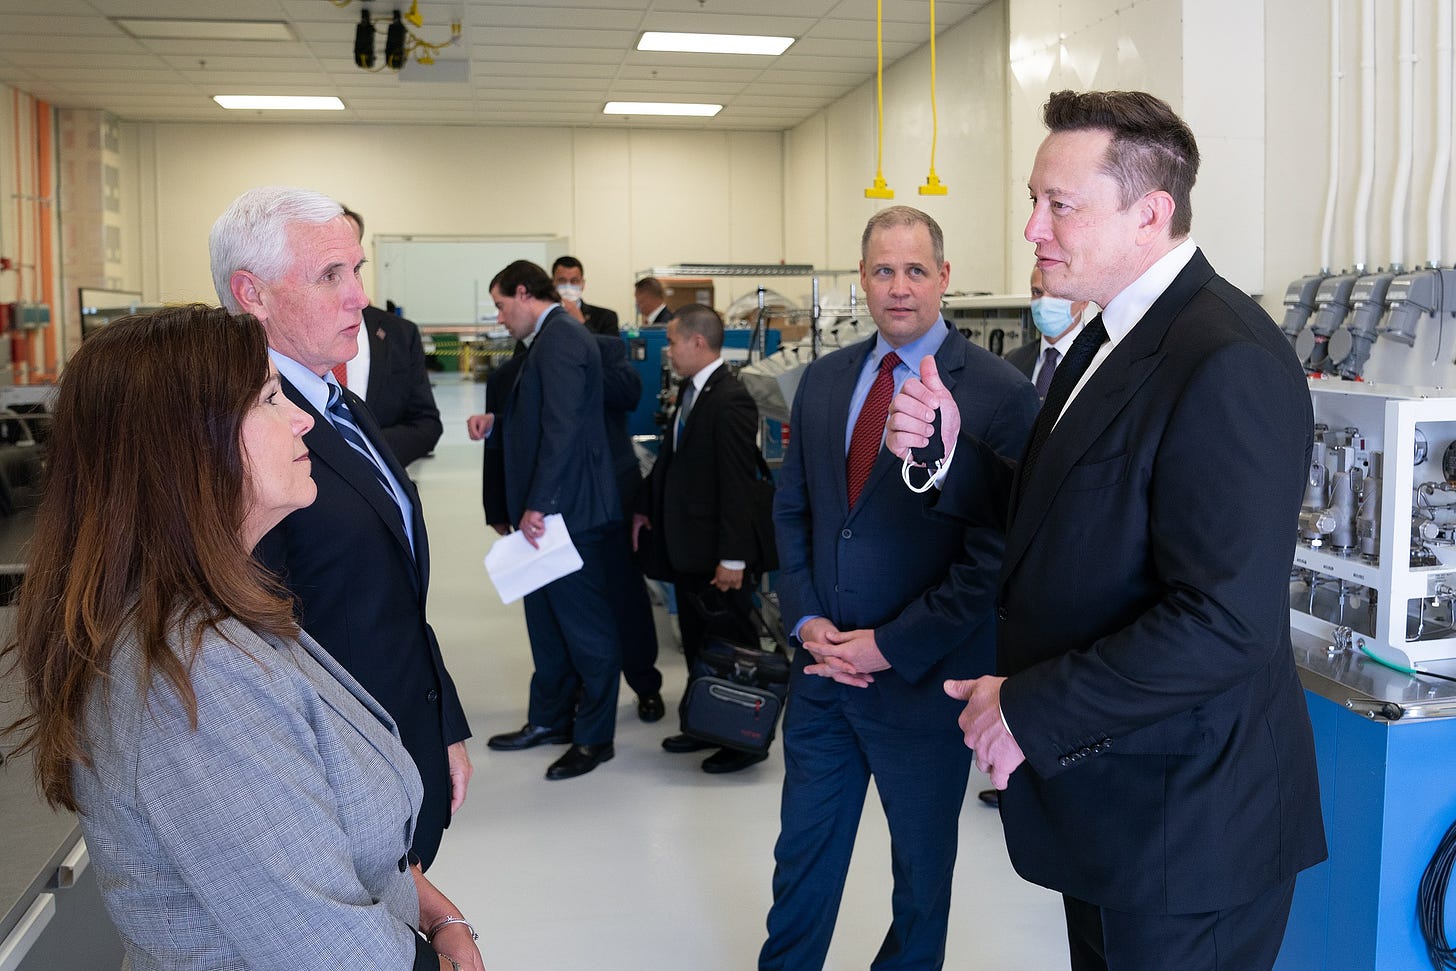 Musk converses with US Vice President Mike Pence, the Second Lady, and other officials